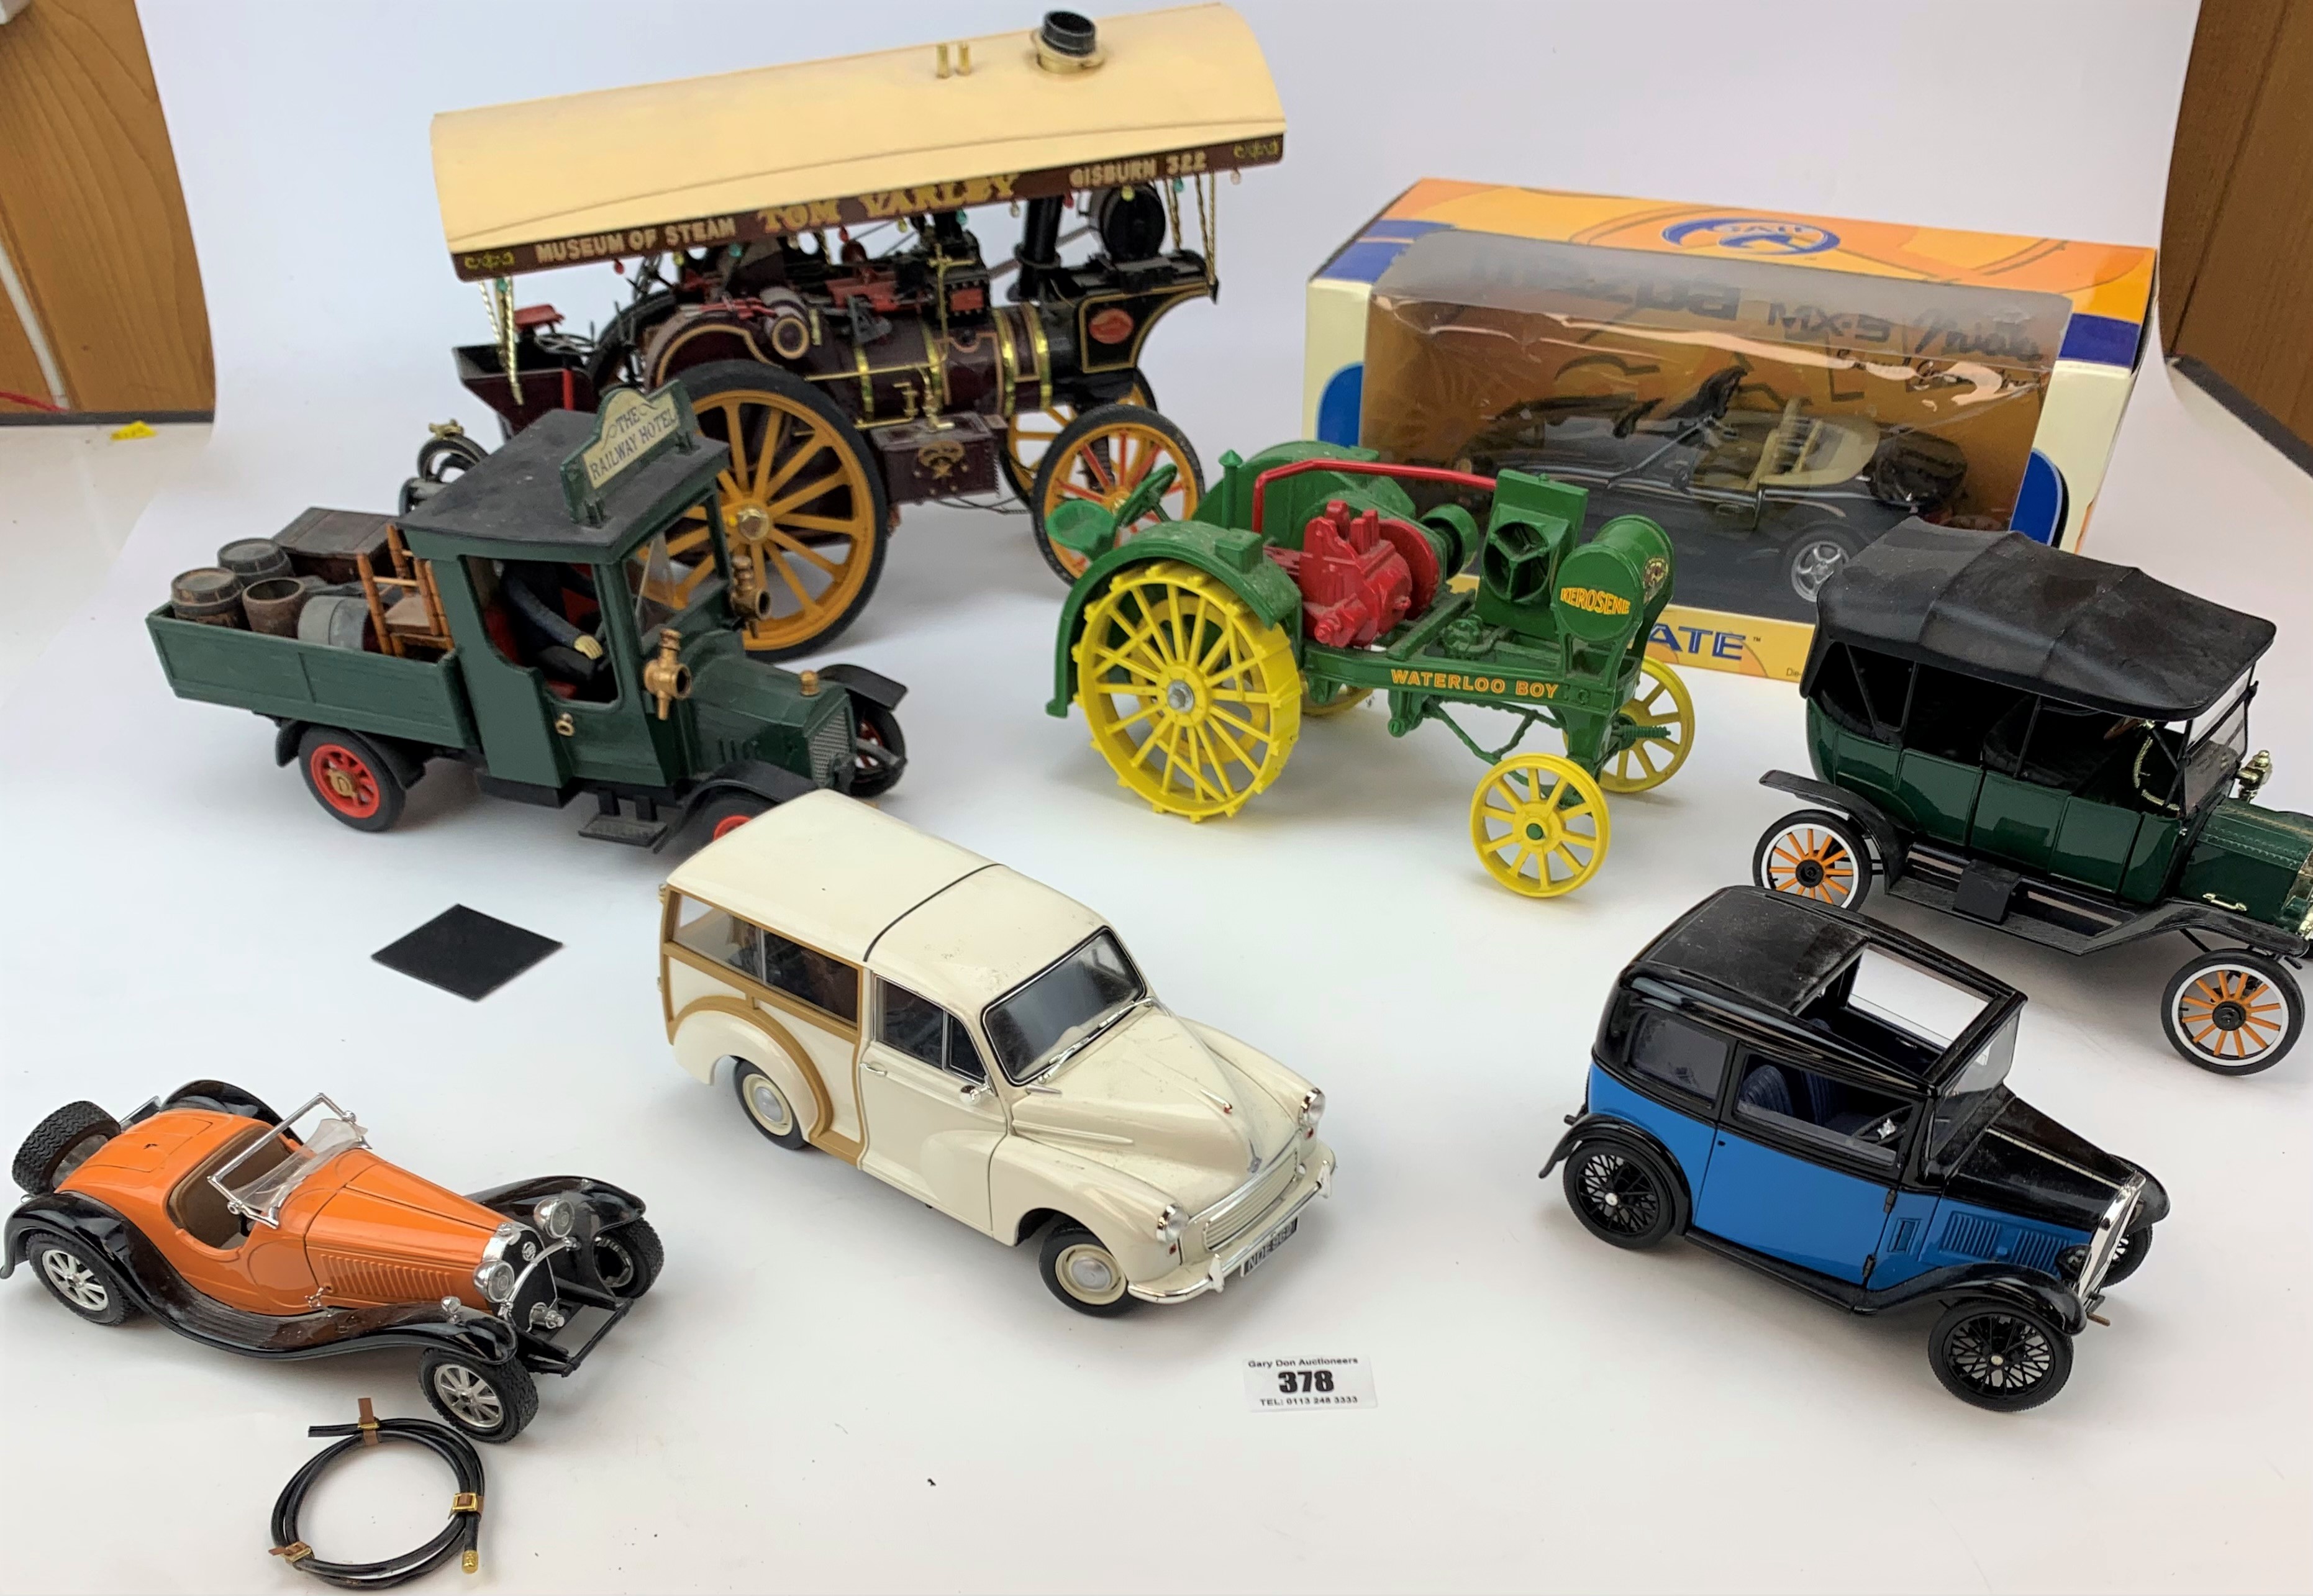 5 loose model cars, boxed Gate Mazda NX5, model Museum of Steam Tom Varley and Waterloo Boy tractor - Image 2 of 17